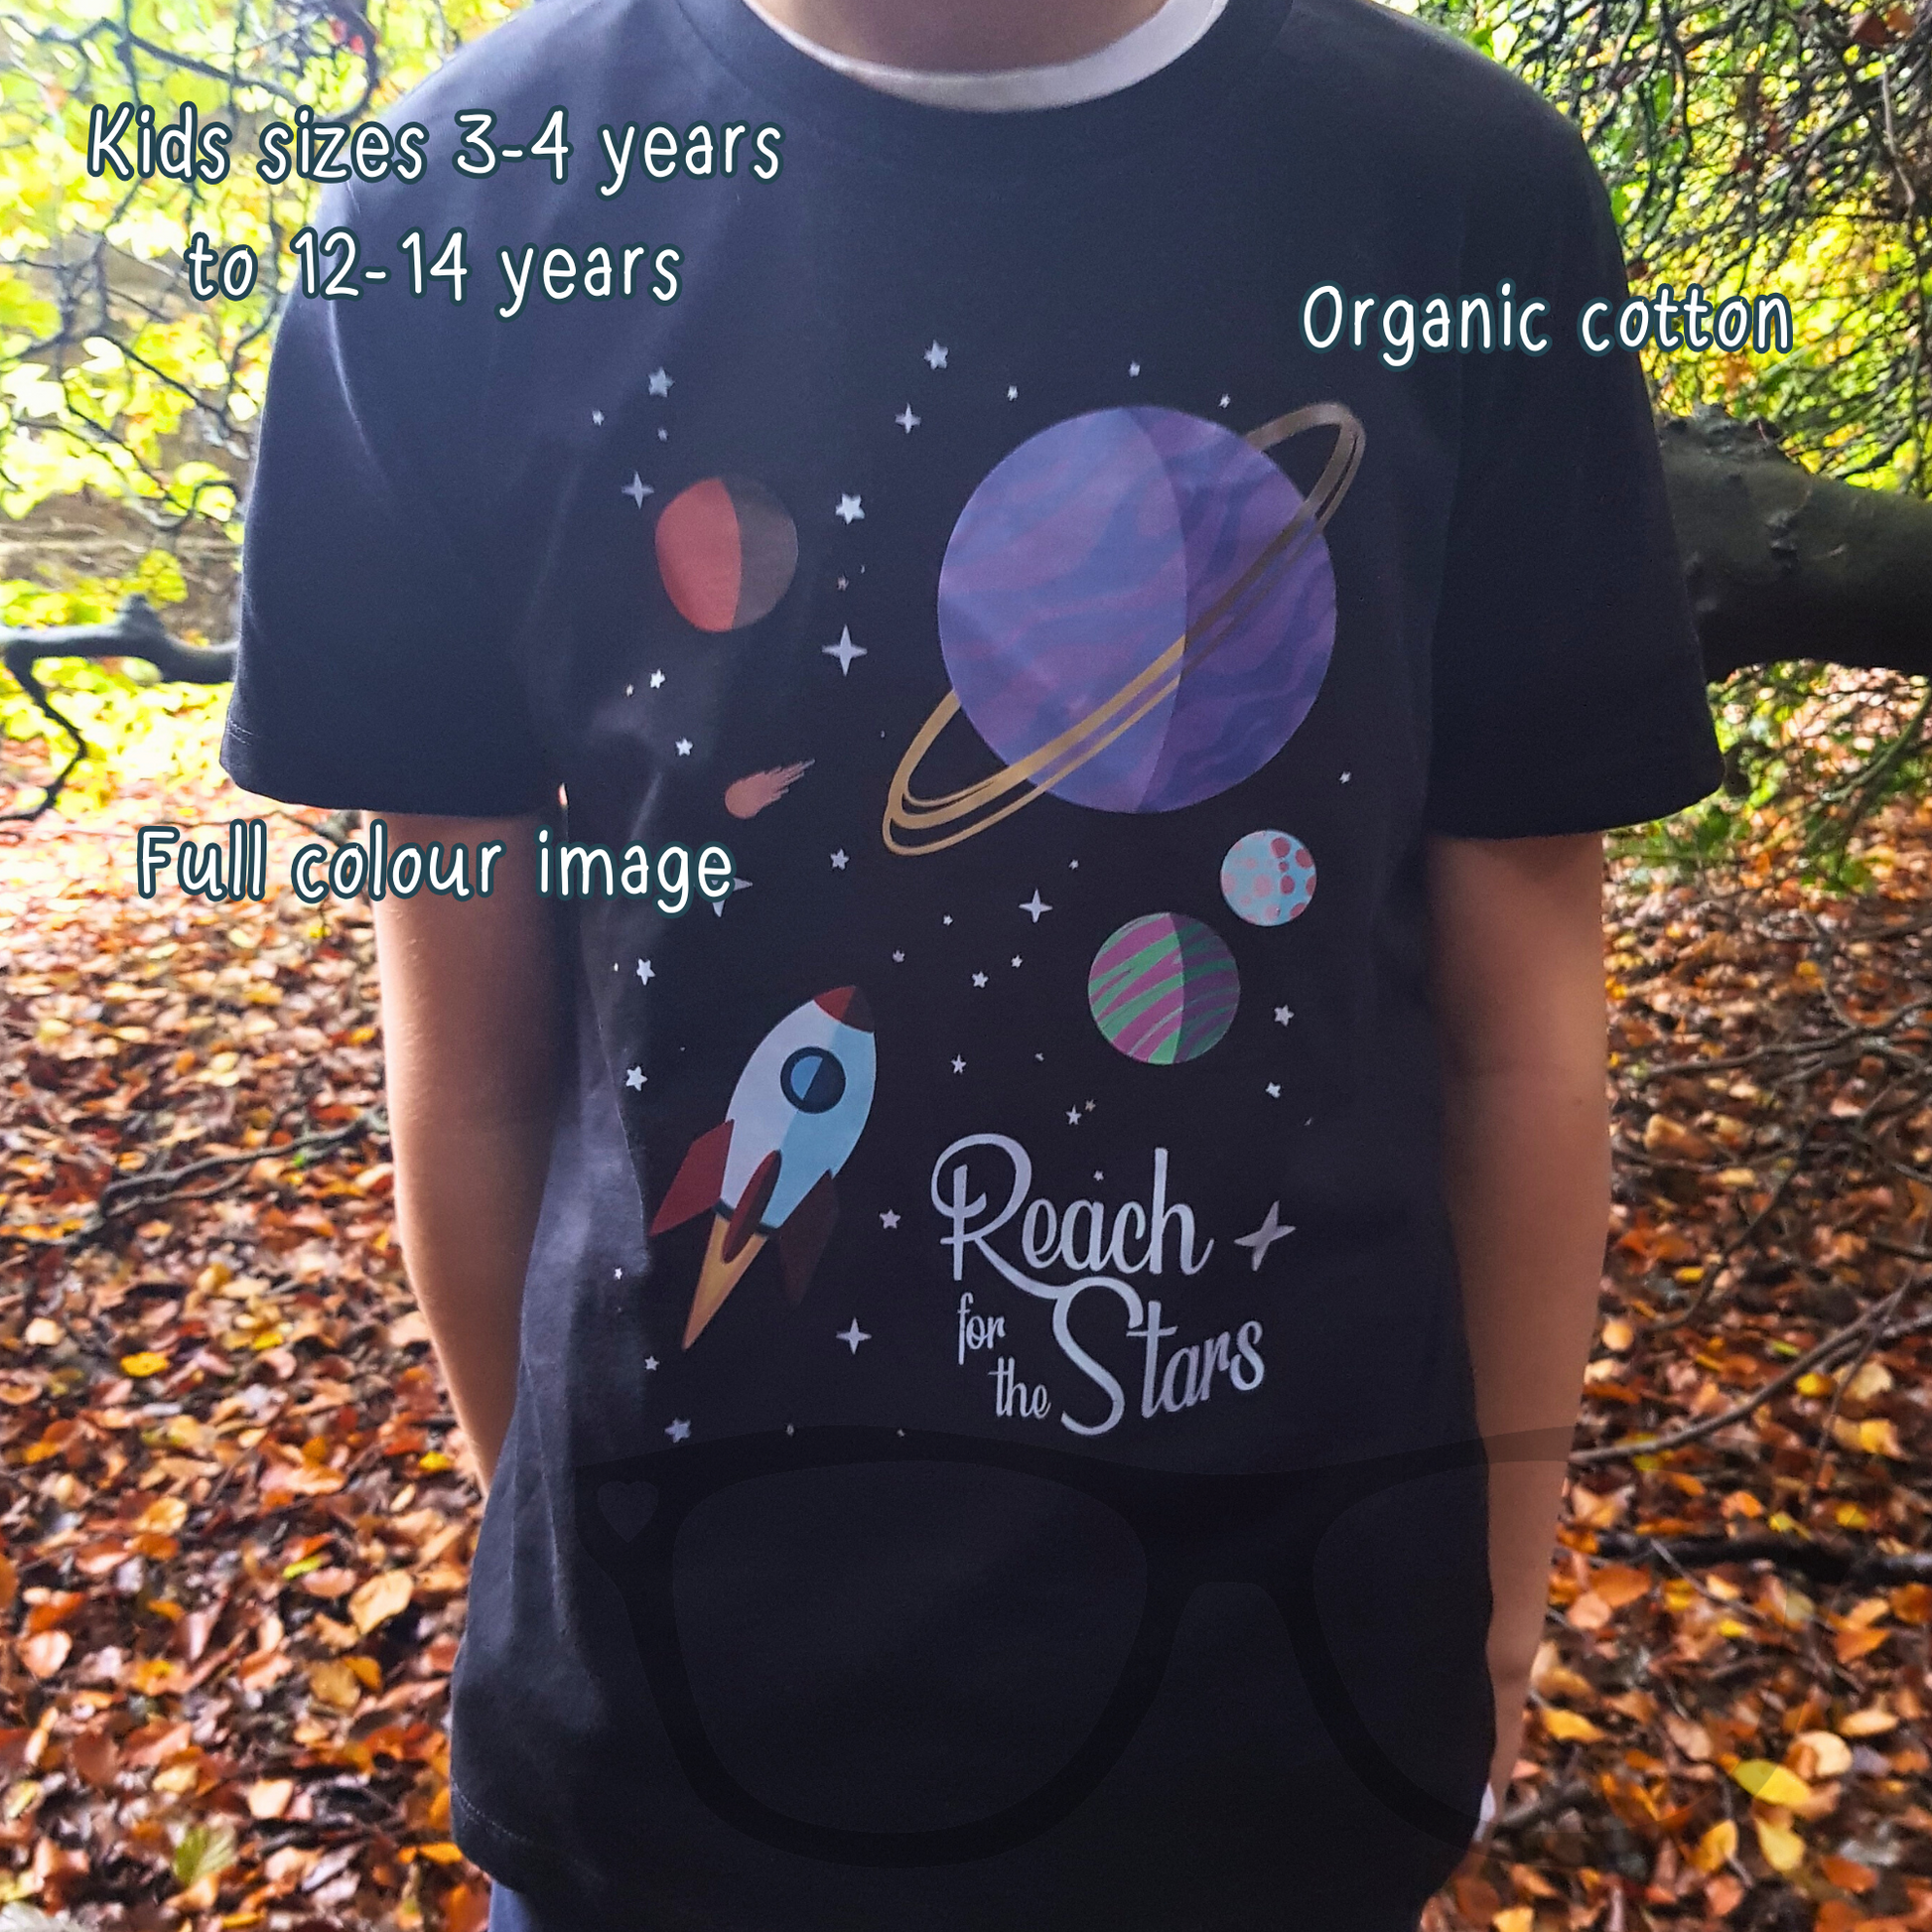 Reach for the stars space themed full colour design featuring a rocket in space on a black organic cotton t-shirt. text reads "Kids Sizes 3-4 years to 12-14 years", "organic cotton" and "Full colour image"